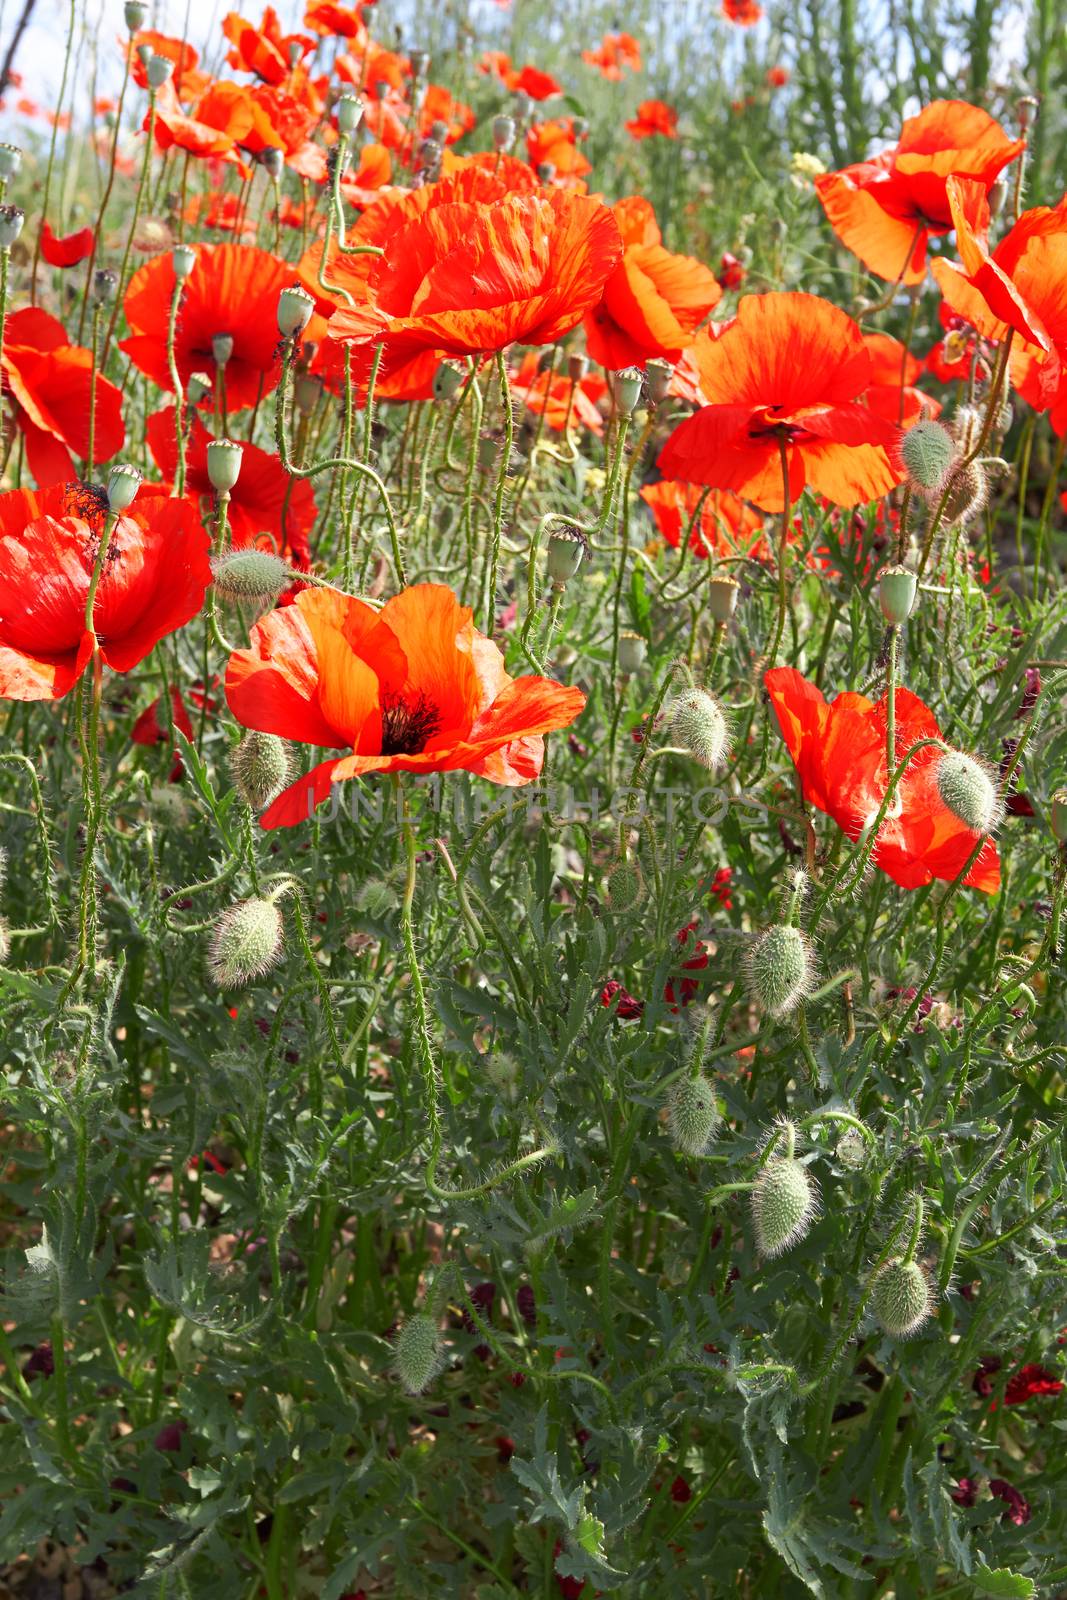 red poppies under cloudy sky in summer